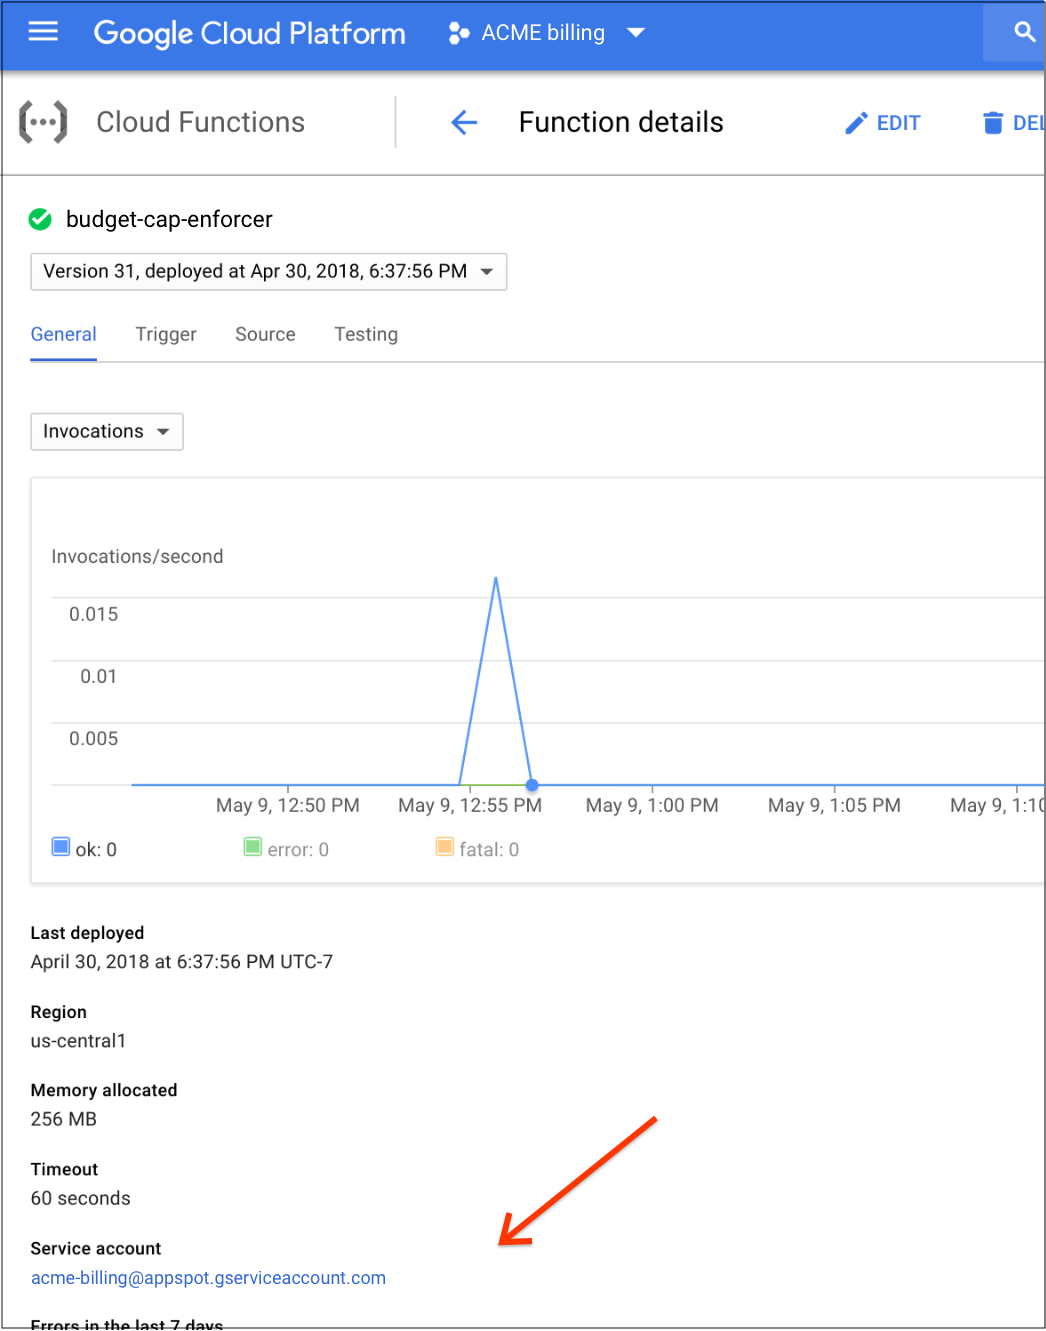 Shows where the service account information can be found in the
         Cloud Function section of the Google Cloud console.